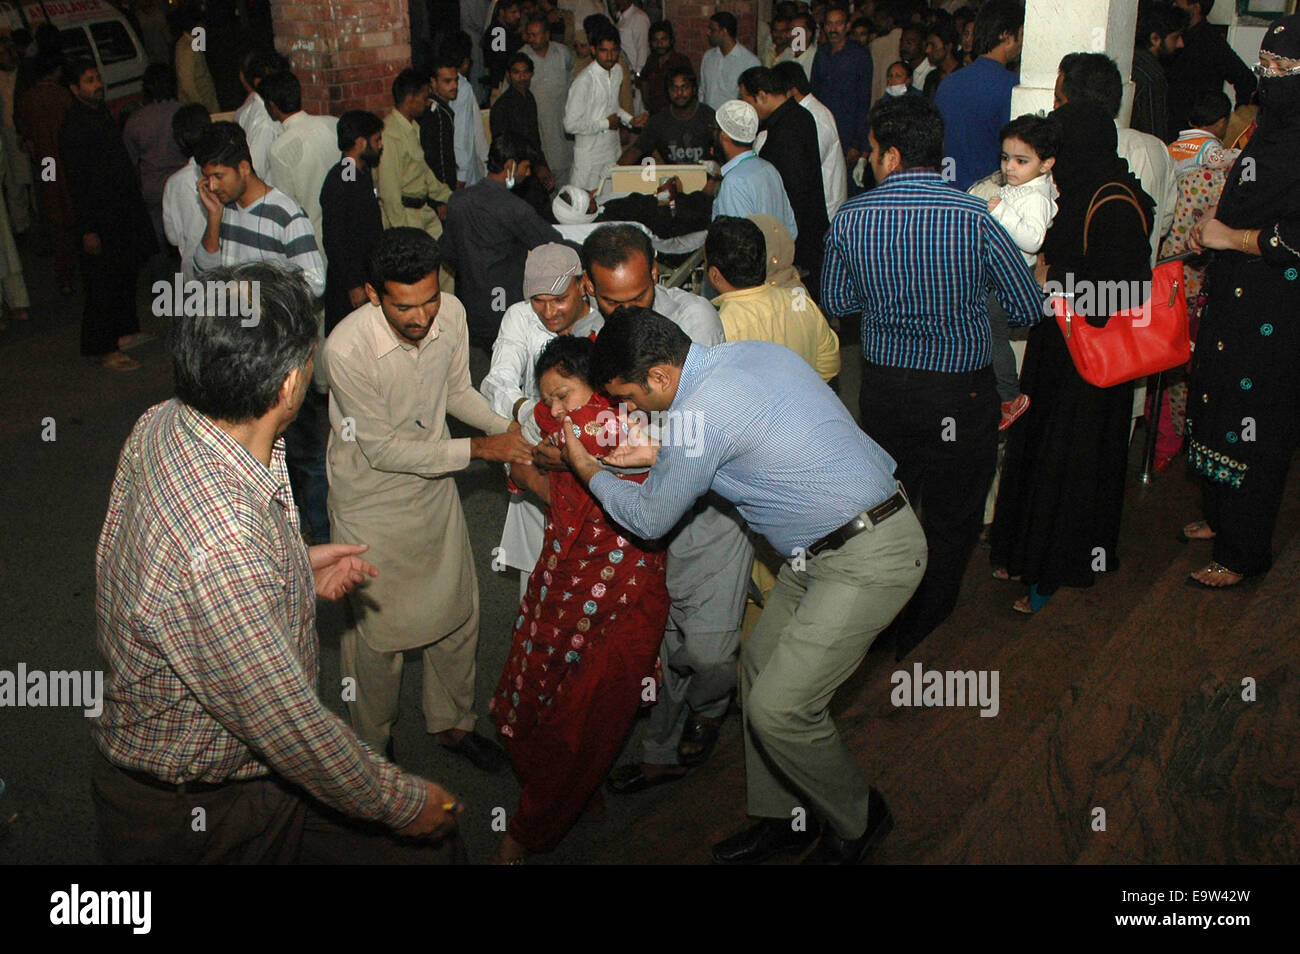 Lahore. 2nd Nov, 2014. People transfer an injured woman to a hospital in eastern Pakistan's Lahore on Nov. 2, 2014. Death toll rose to 54 and over 100 others were injured in the Sunday evening's suicide blast that took place near Wagah border crossing in Pakistan's eastern city of Lahore, hospital sources said. Credit:  Sajjad/Xinhua/Alamy Live News Stock Photo